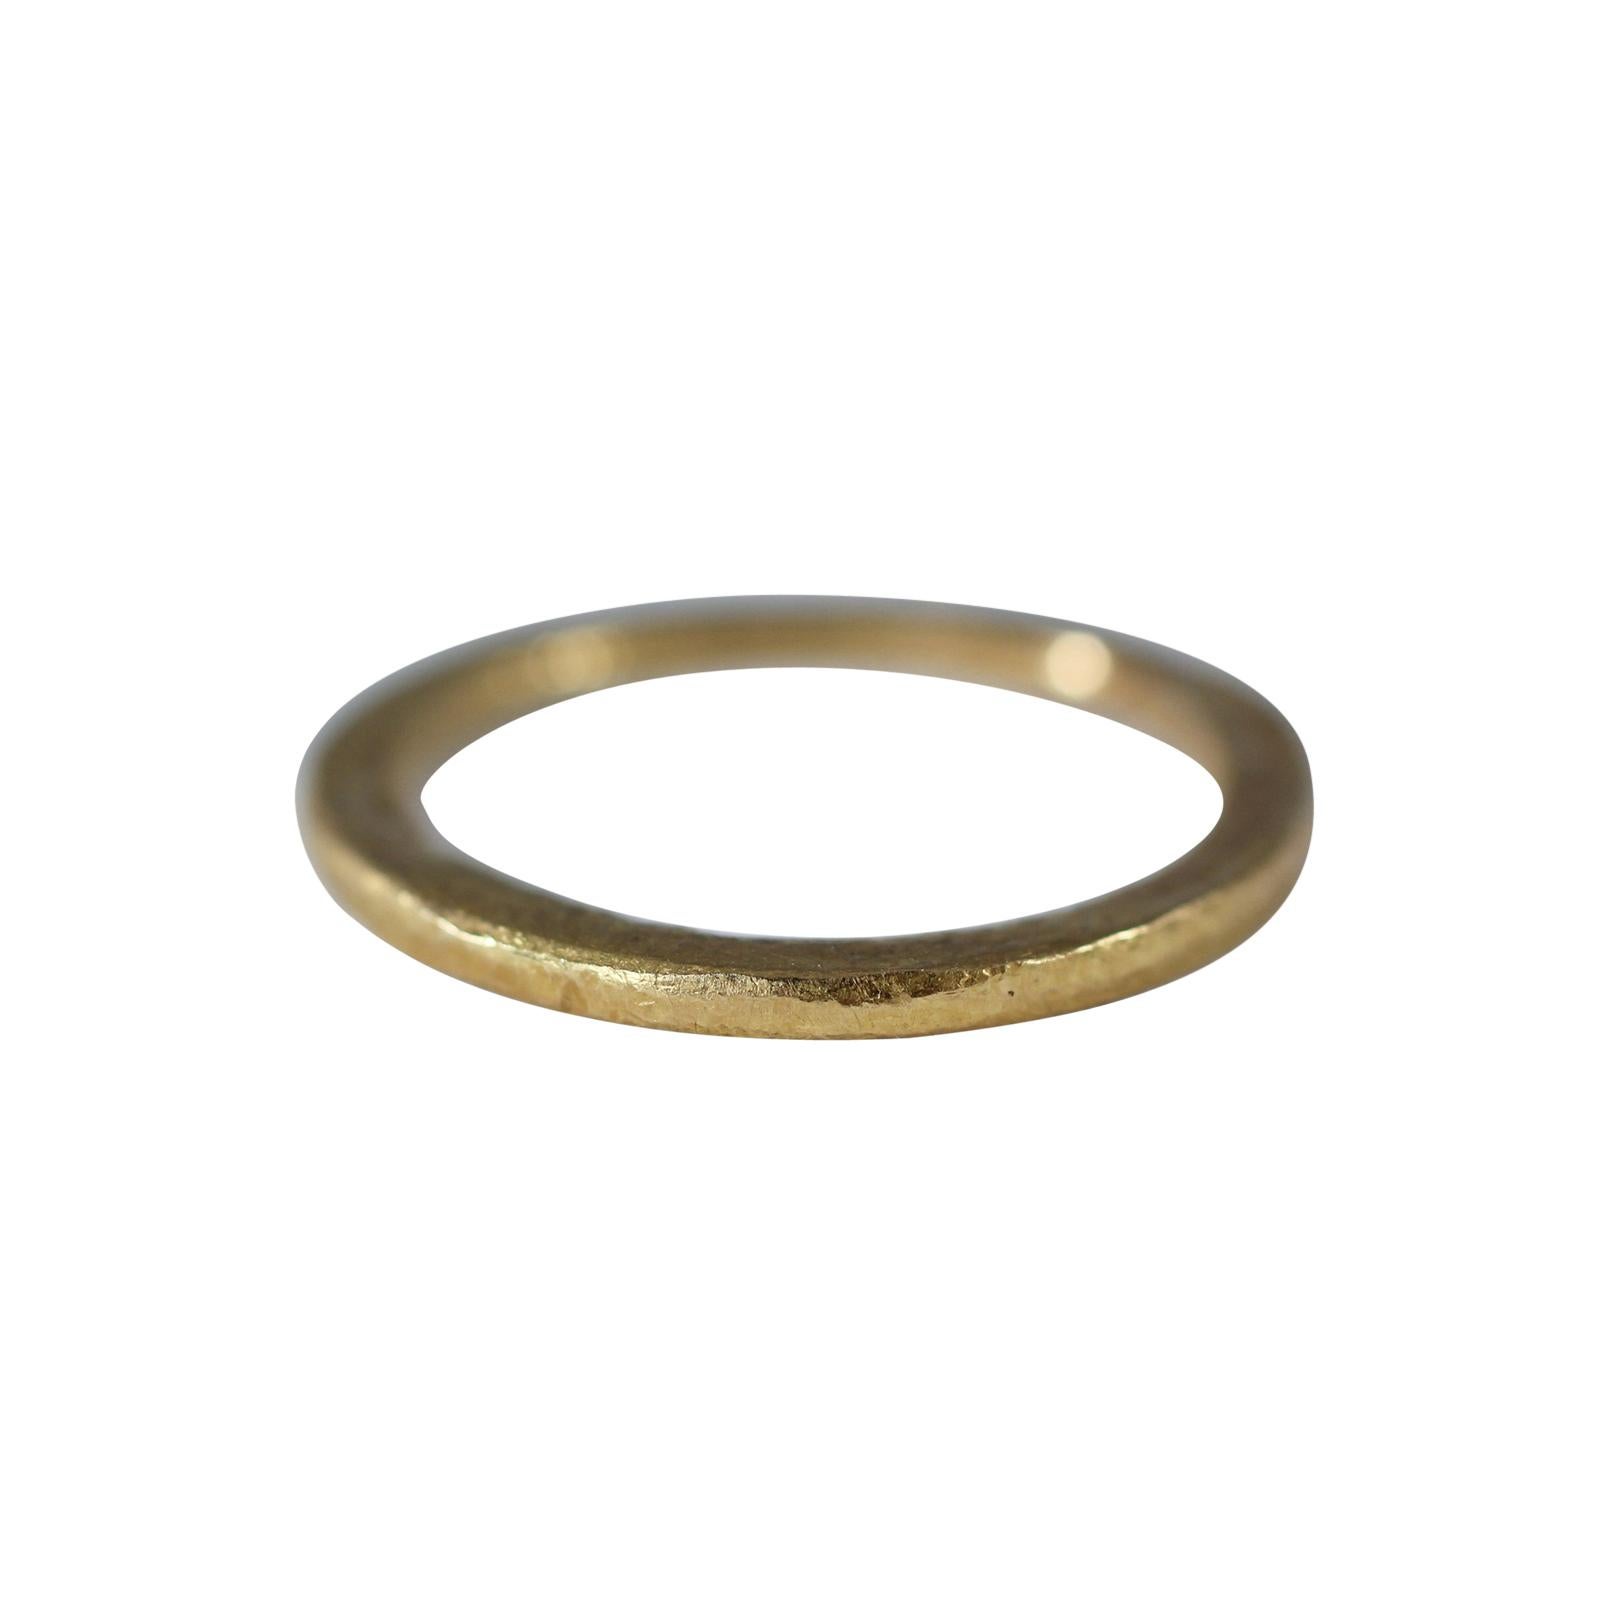 AB Jewelry NYC Band Rings